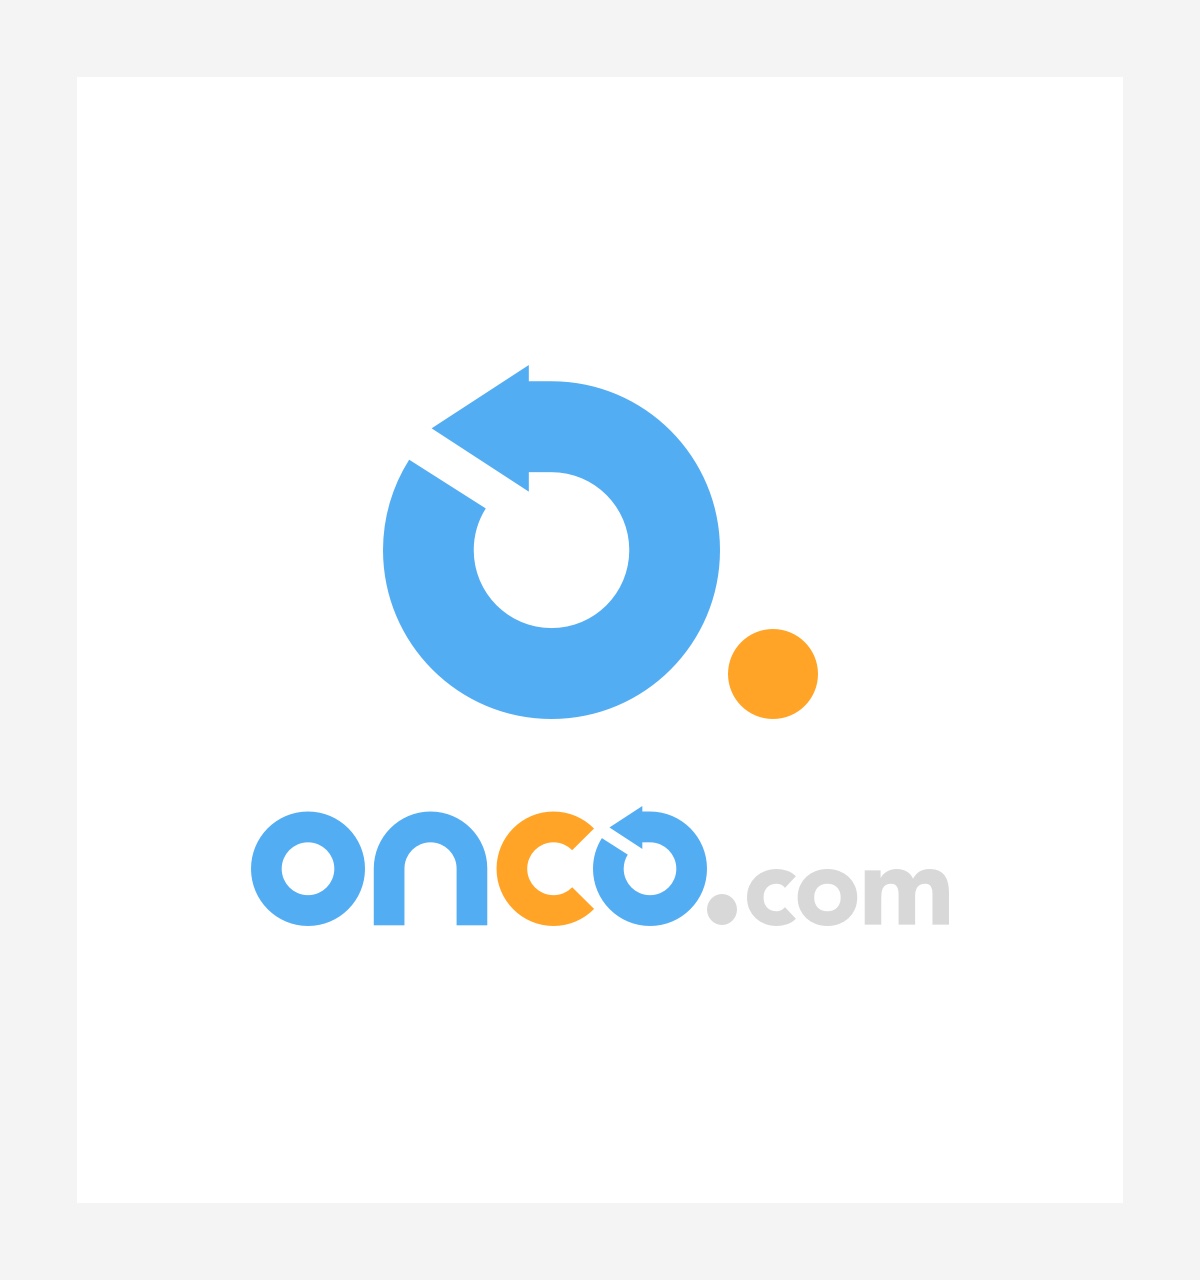 Onco.com introduces a teleconsultation service to help cancer patients get advice remotely from oncologists decoding=